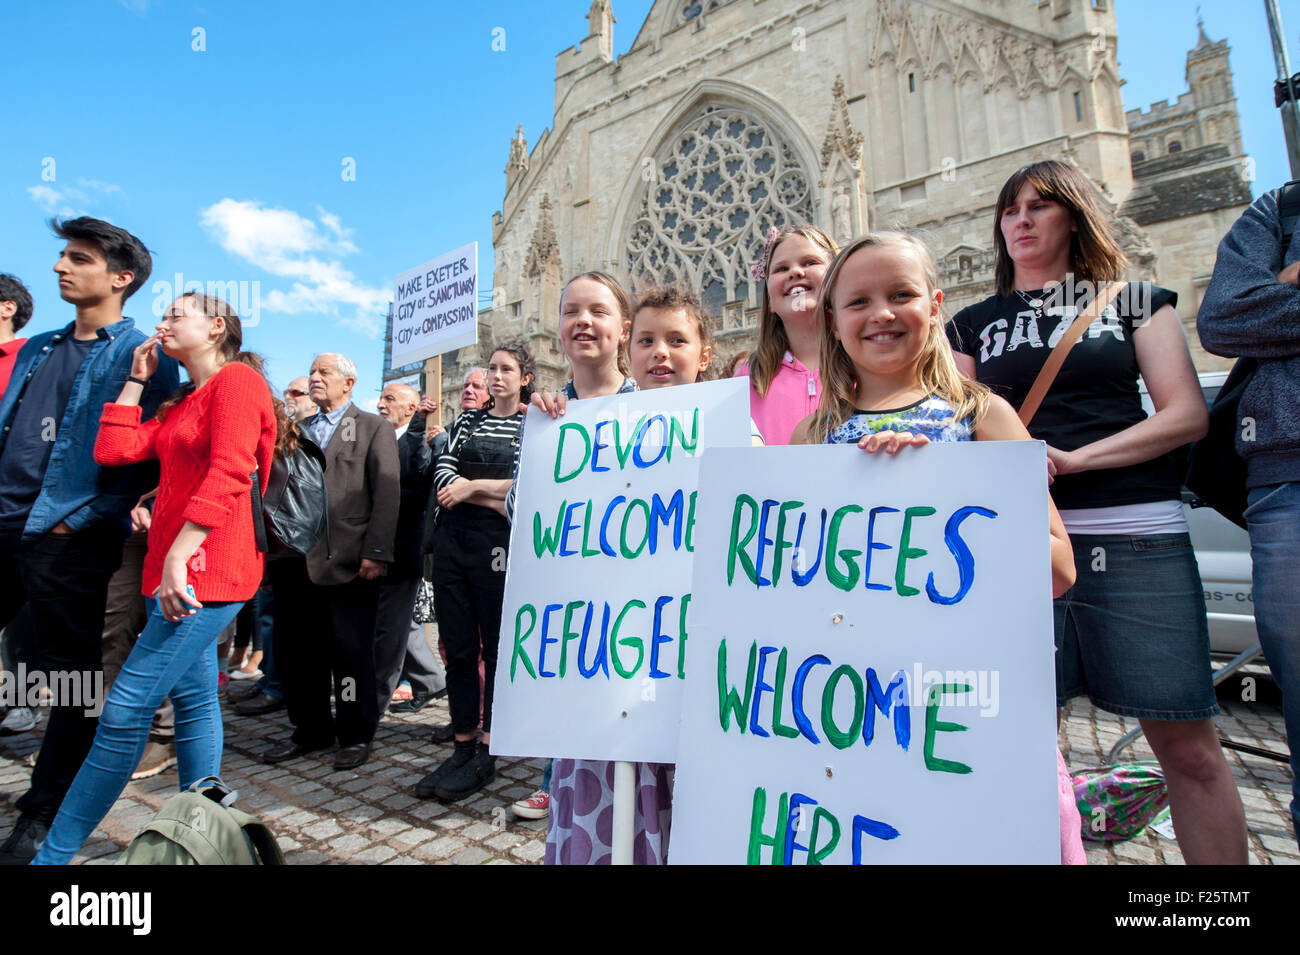 Exeter, Devon, UK. 12th Sep, 2015. Young girls hold up signs saying 'Devon Welcomes Refugees' during the Exeter Solidarity With Refugees Event outside the west front of Exeter Cathedral Credit:  Clive Chilvers/Alamy Live News Stock Photo